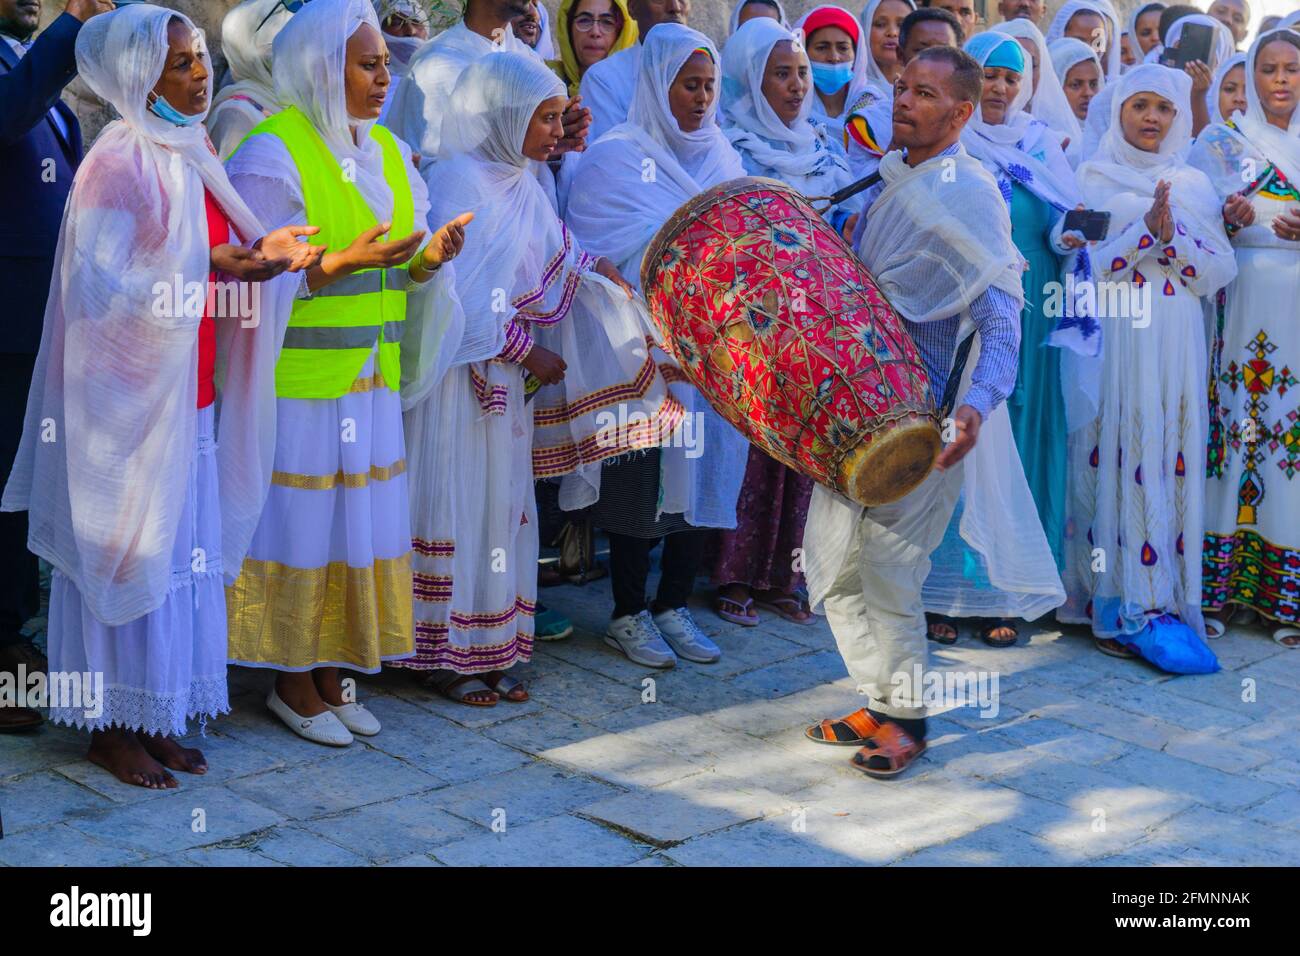 Jerusalem, Israel - May 01, 2021: Paschal Vigil (Easter Holy Saturday) dance of the Ethiopian Orthodox Tewahedo Church community, in the courtyard of Stock Photo